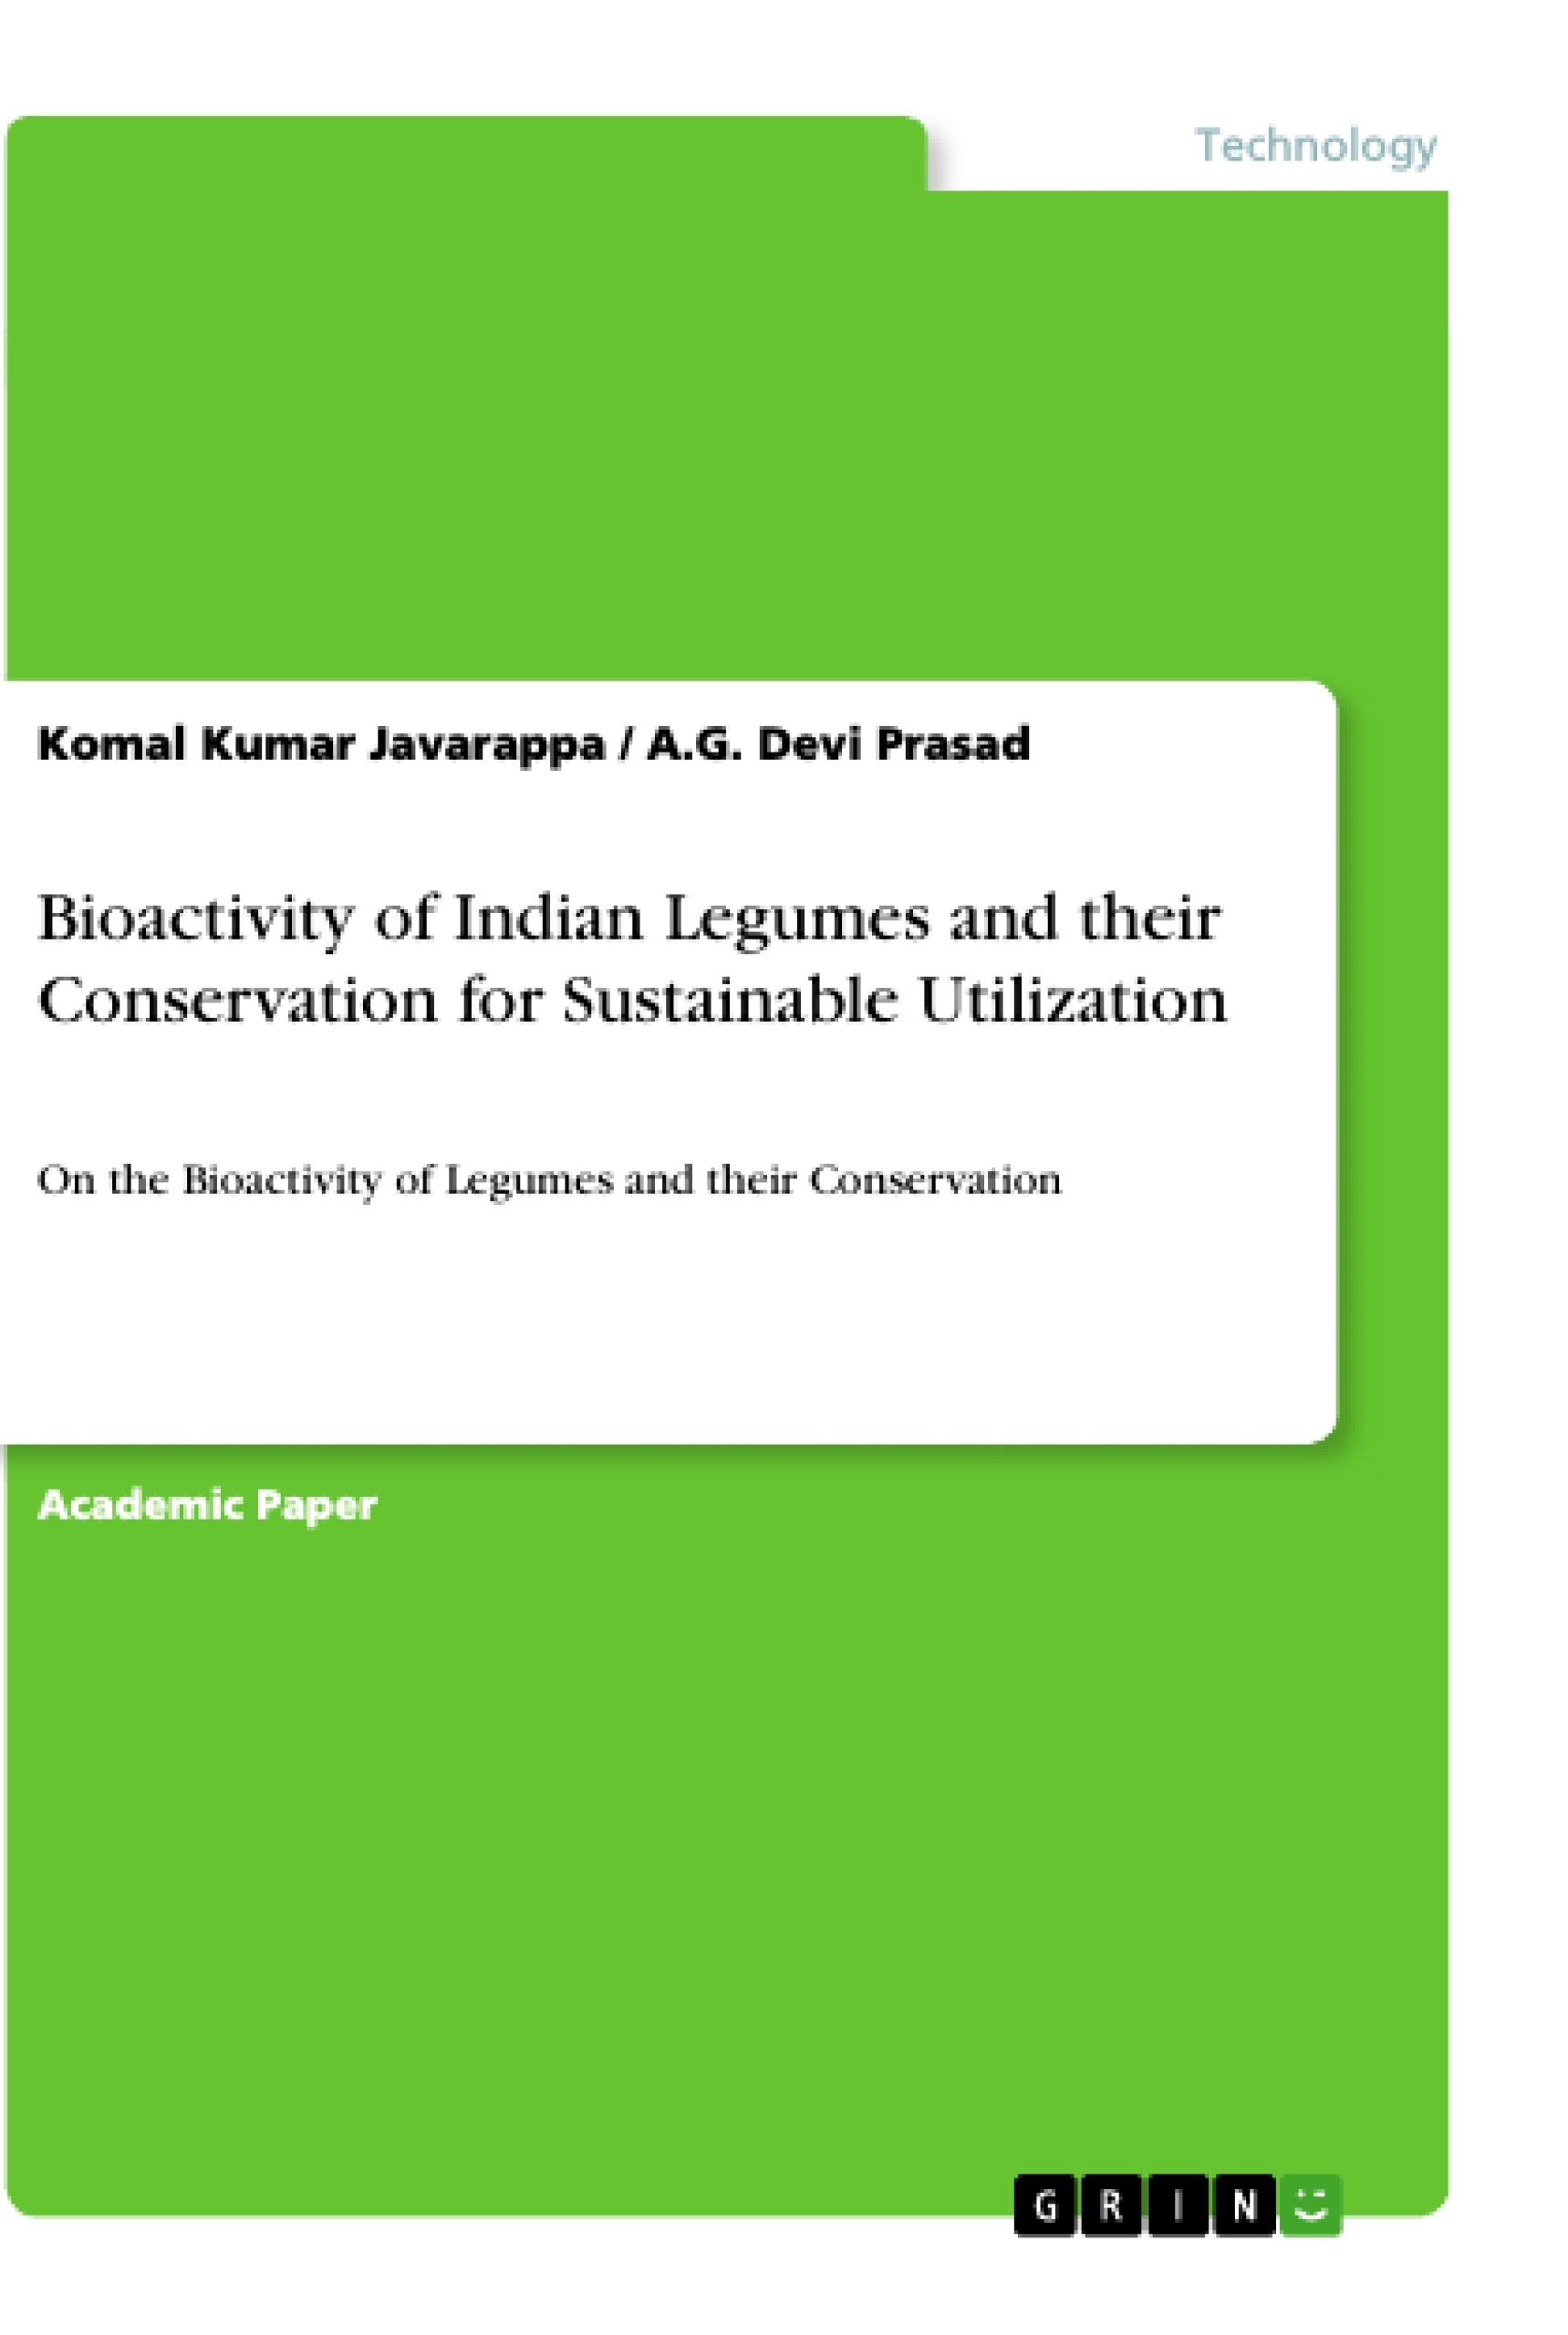 Título: Bioactivity of Indian Legumes and their Conservation for Sustainable Utilization